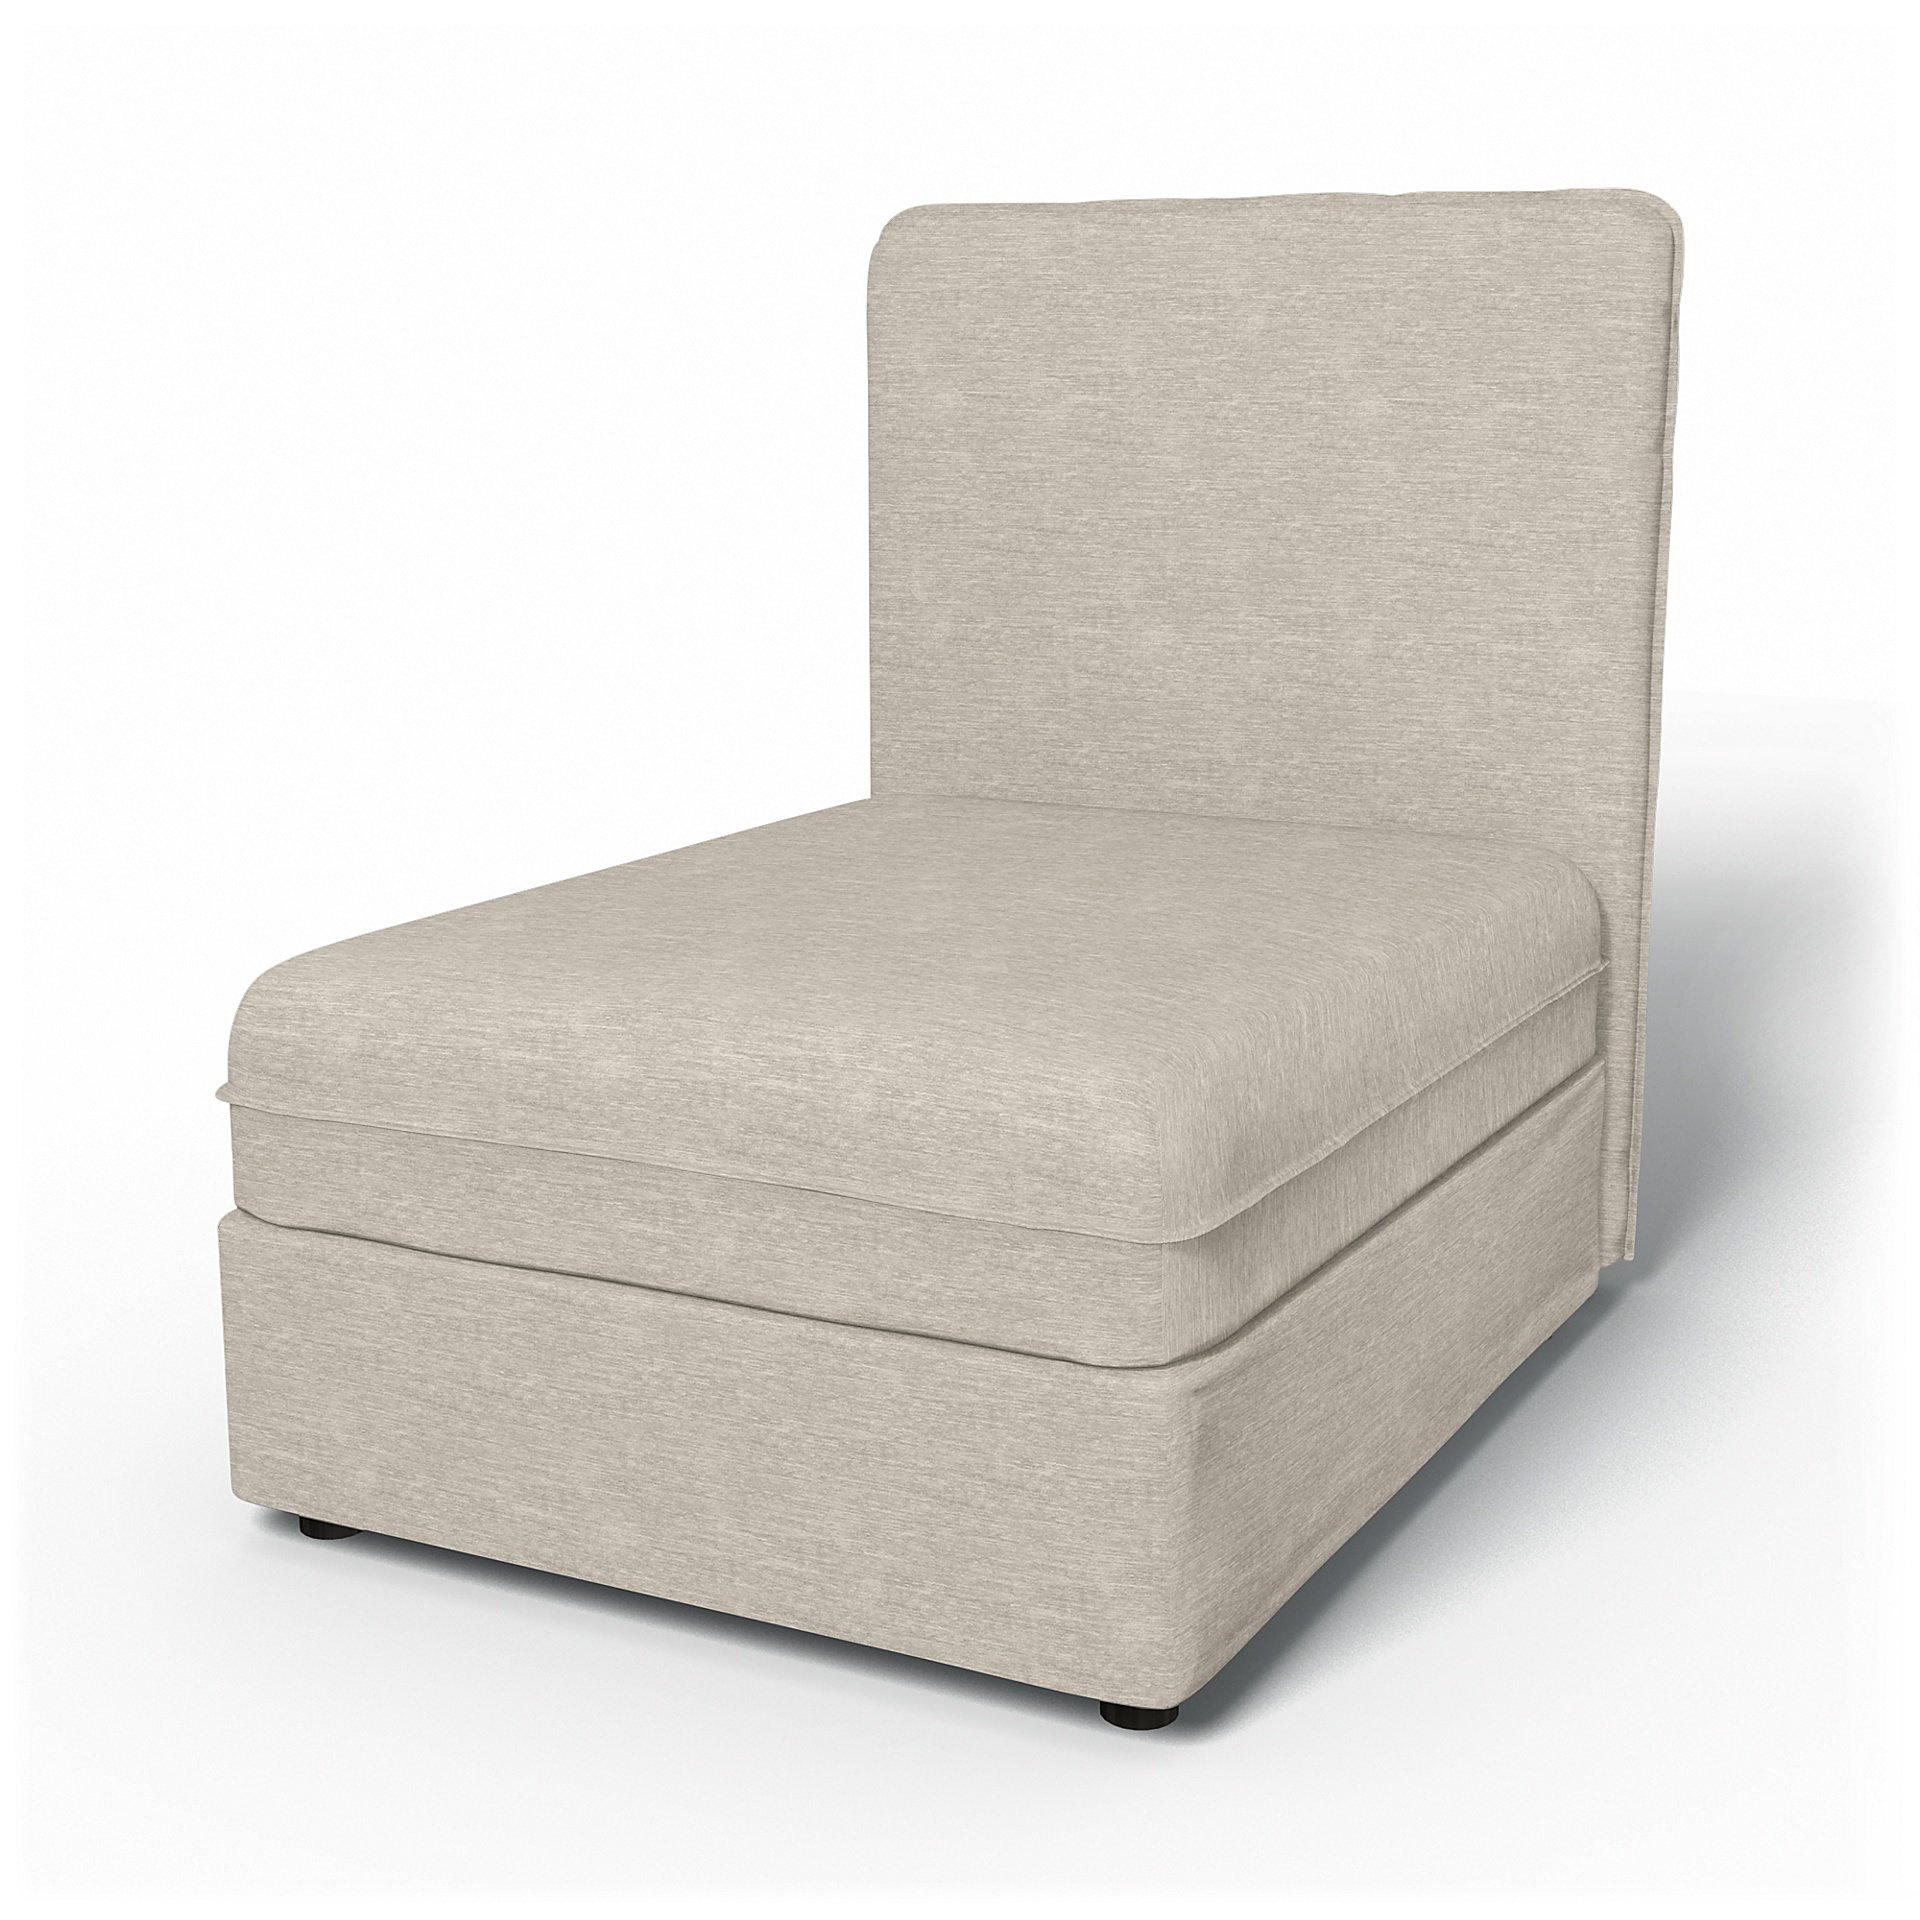 IKEA - Vallentuna Seat Module with High Back Cover 80x100cm 32x32in, Natural White, Velvet - Bemz